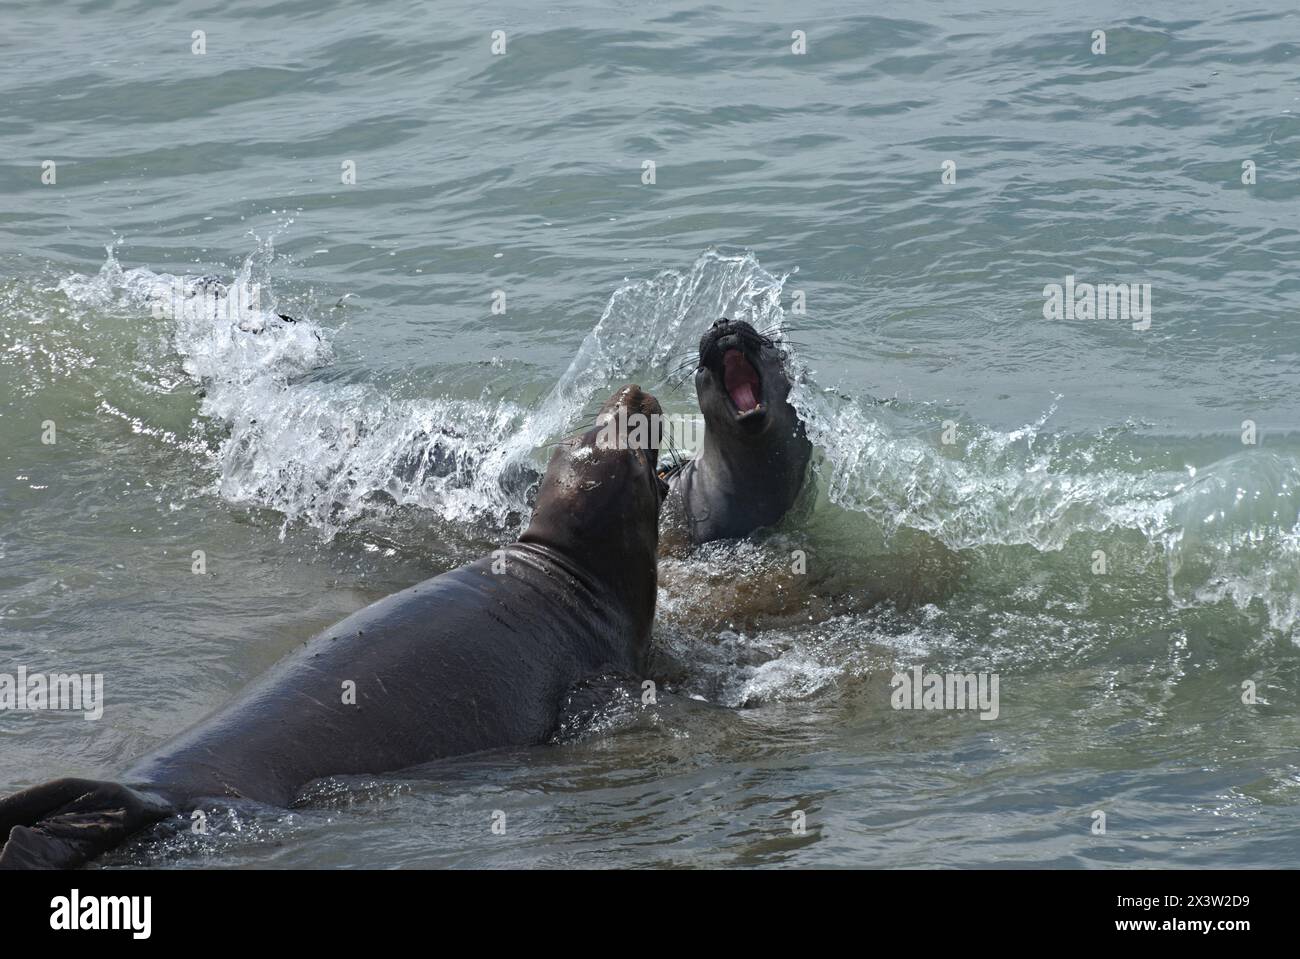 2  elephant seal expressively shout for joy in Pacific Ocean, spring is here h& full of life. Stock Photo